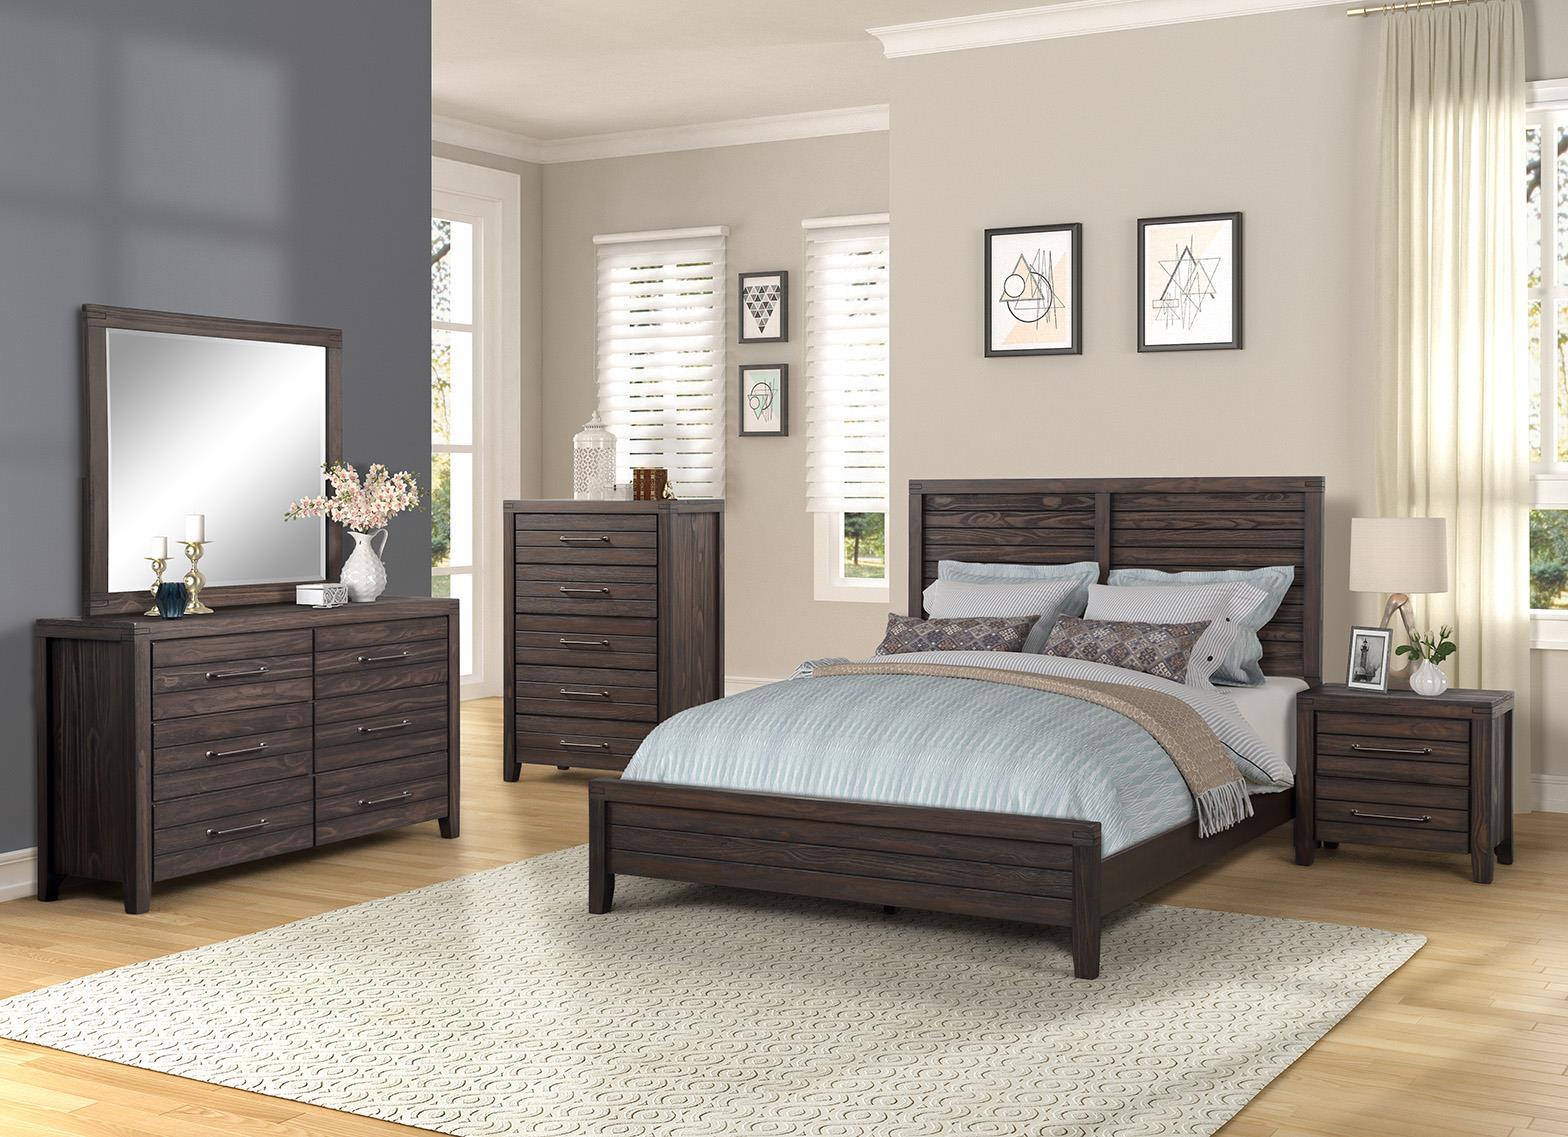 Contemporary, Traditional Panel Bedroom Set CRESTWOOD 1465-105-Set 1465-105-2N-3PC in Auburn, Brown 